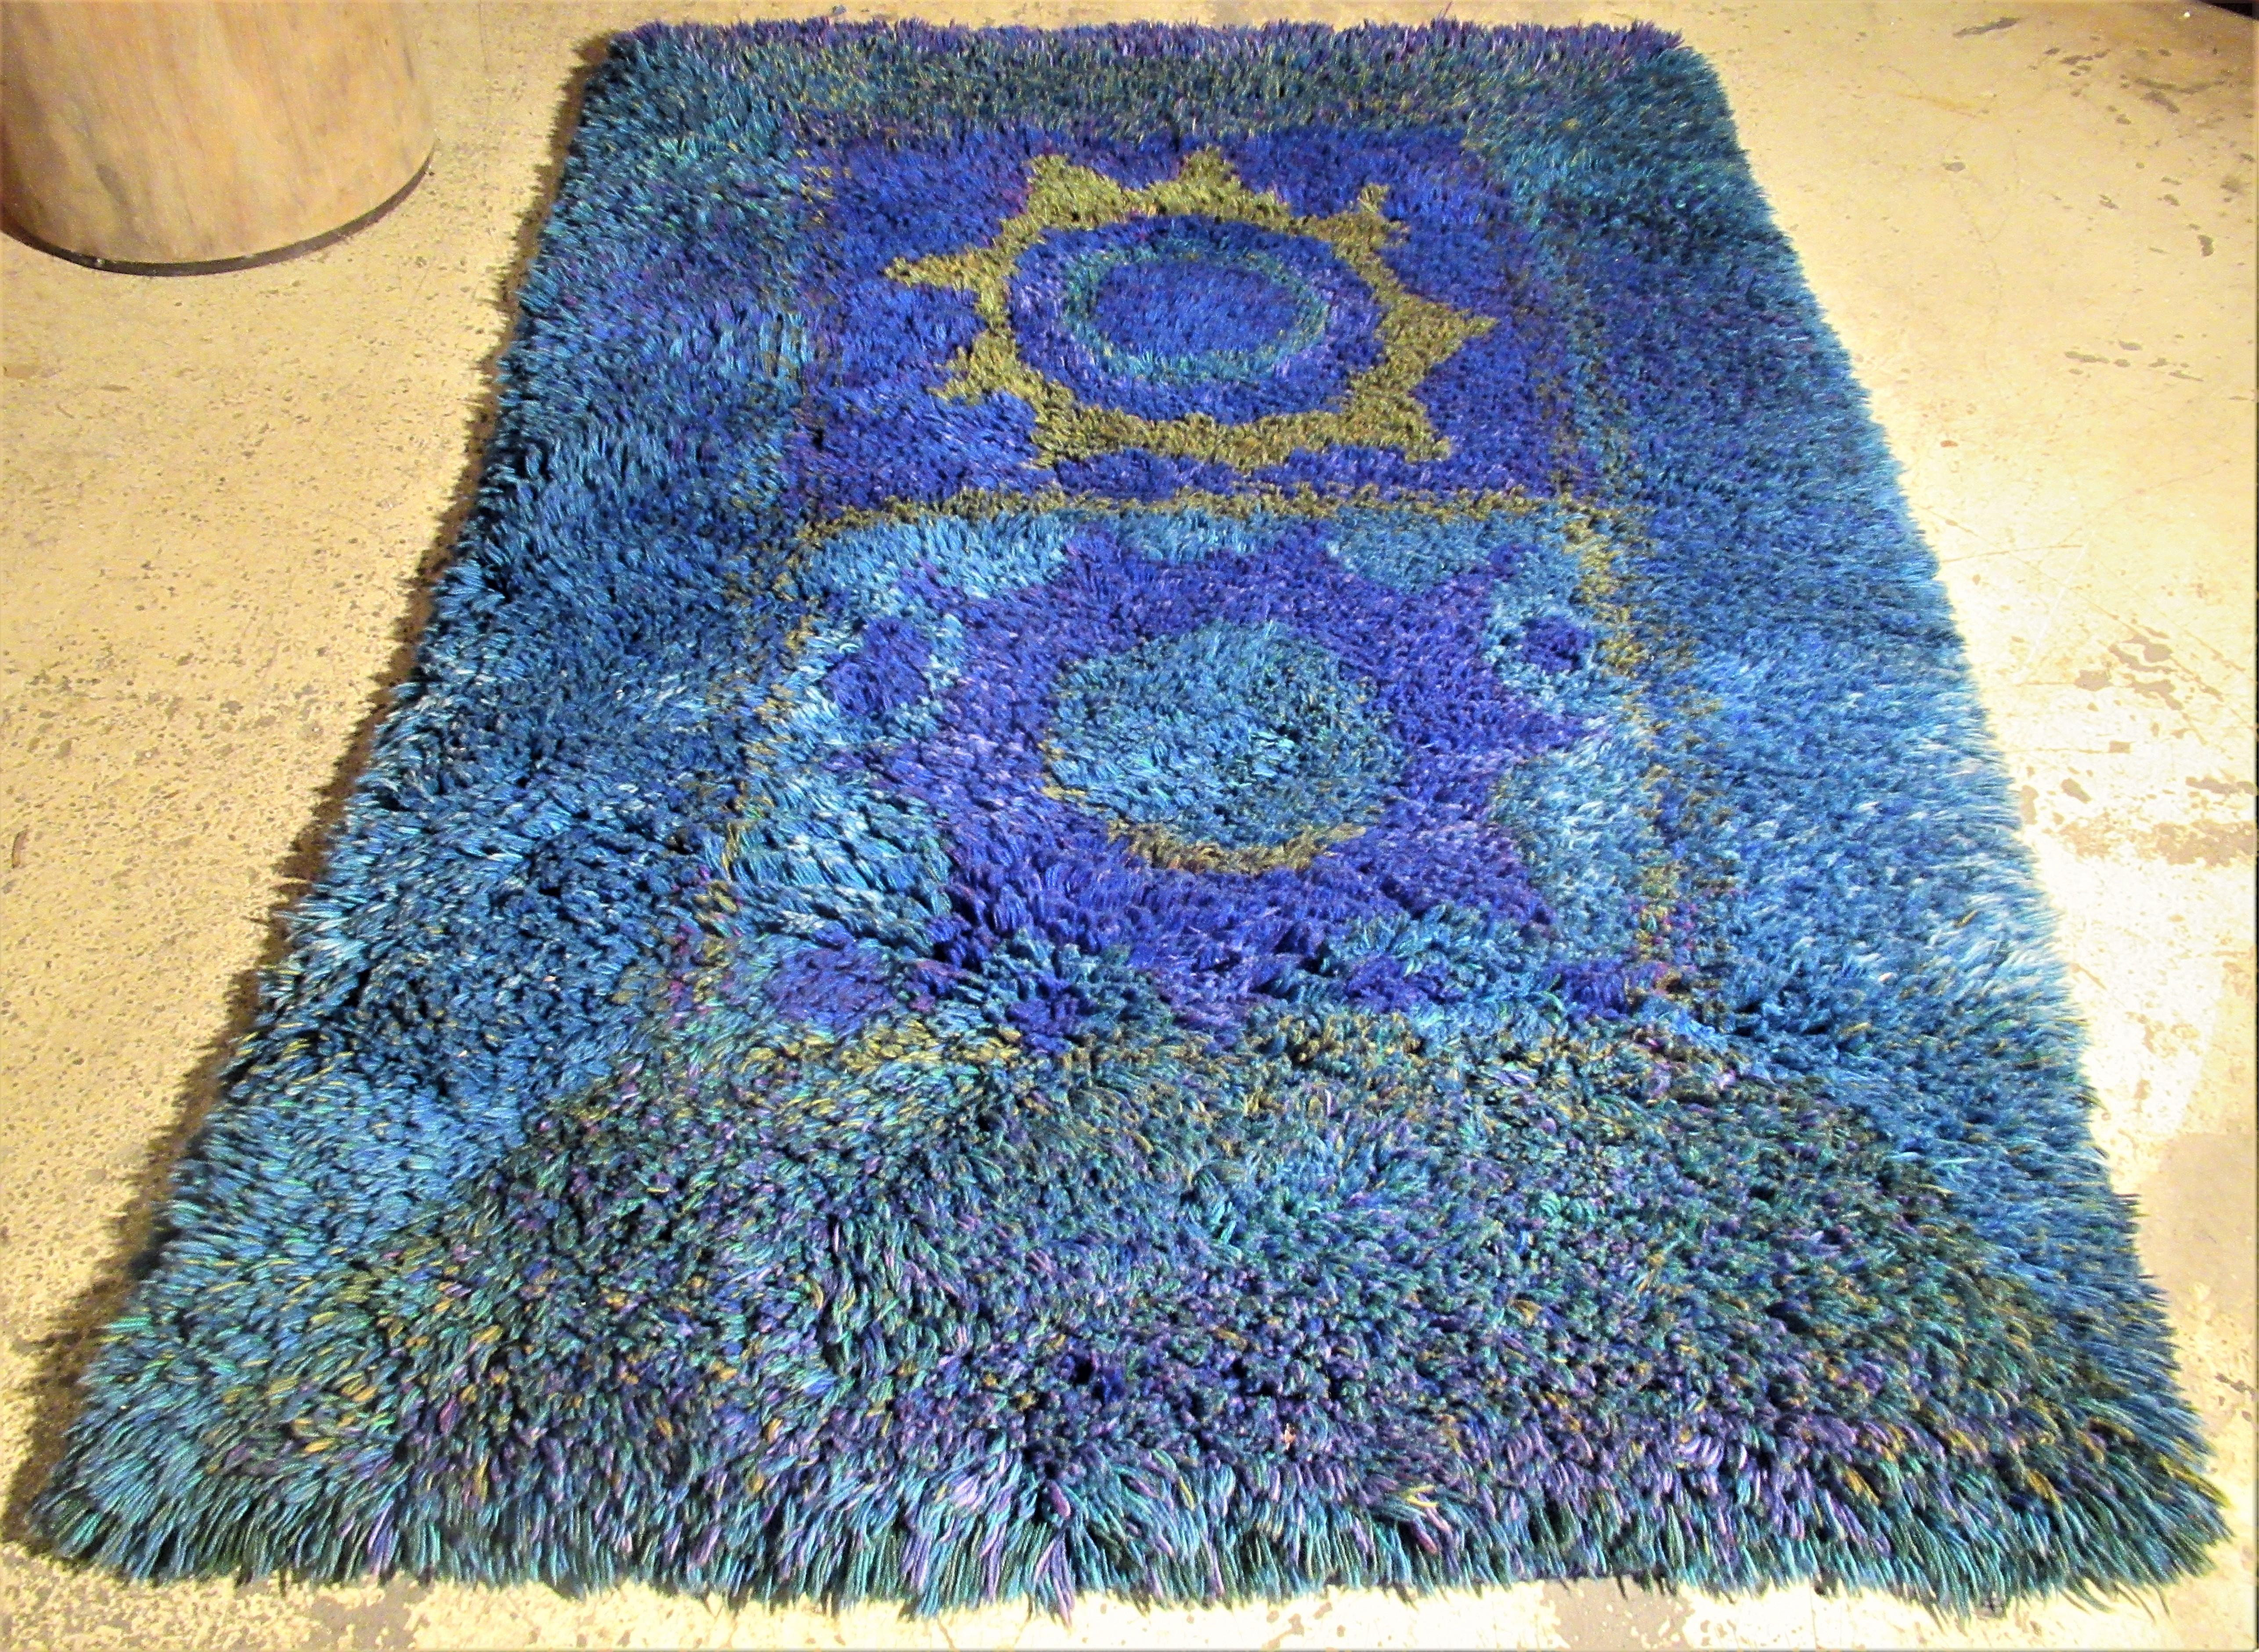  Early Finland Modernist Handwoven Long Pile Wall Tapestry Rug by Ritva Puotila 6